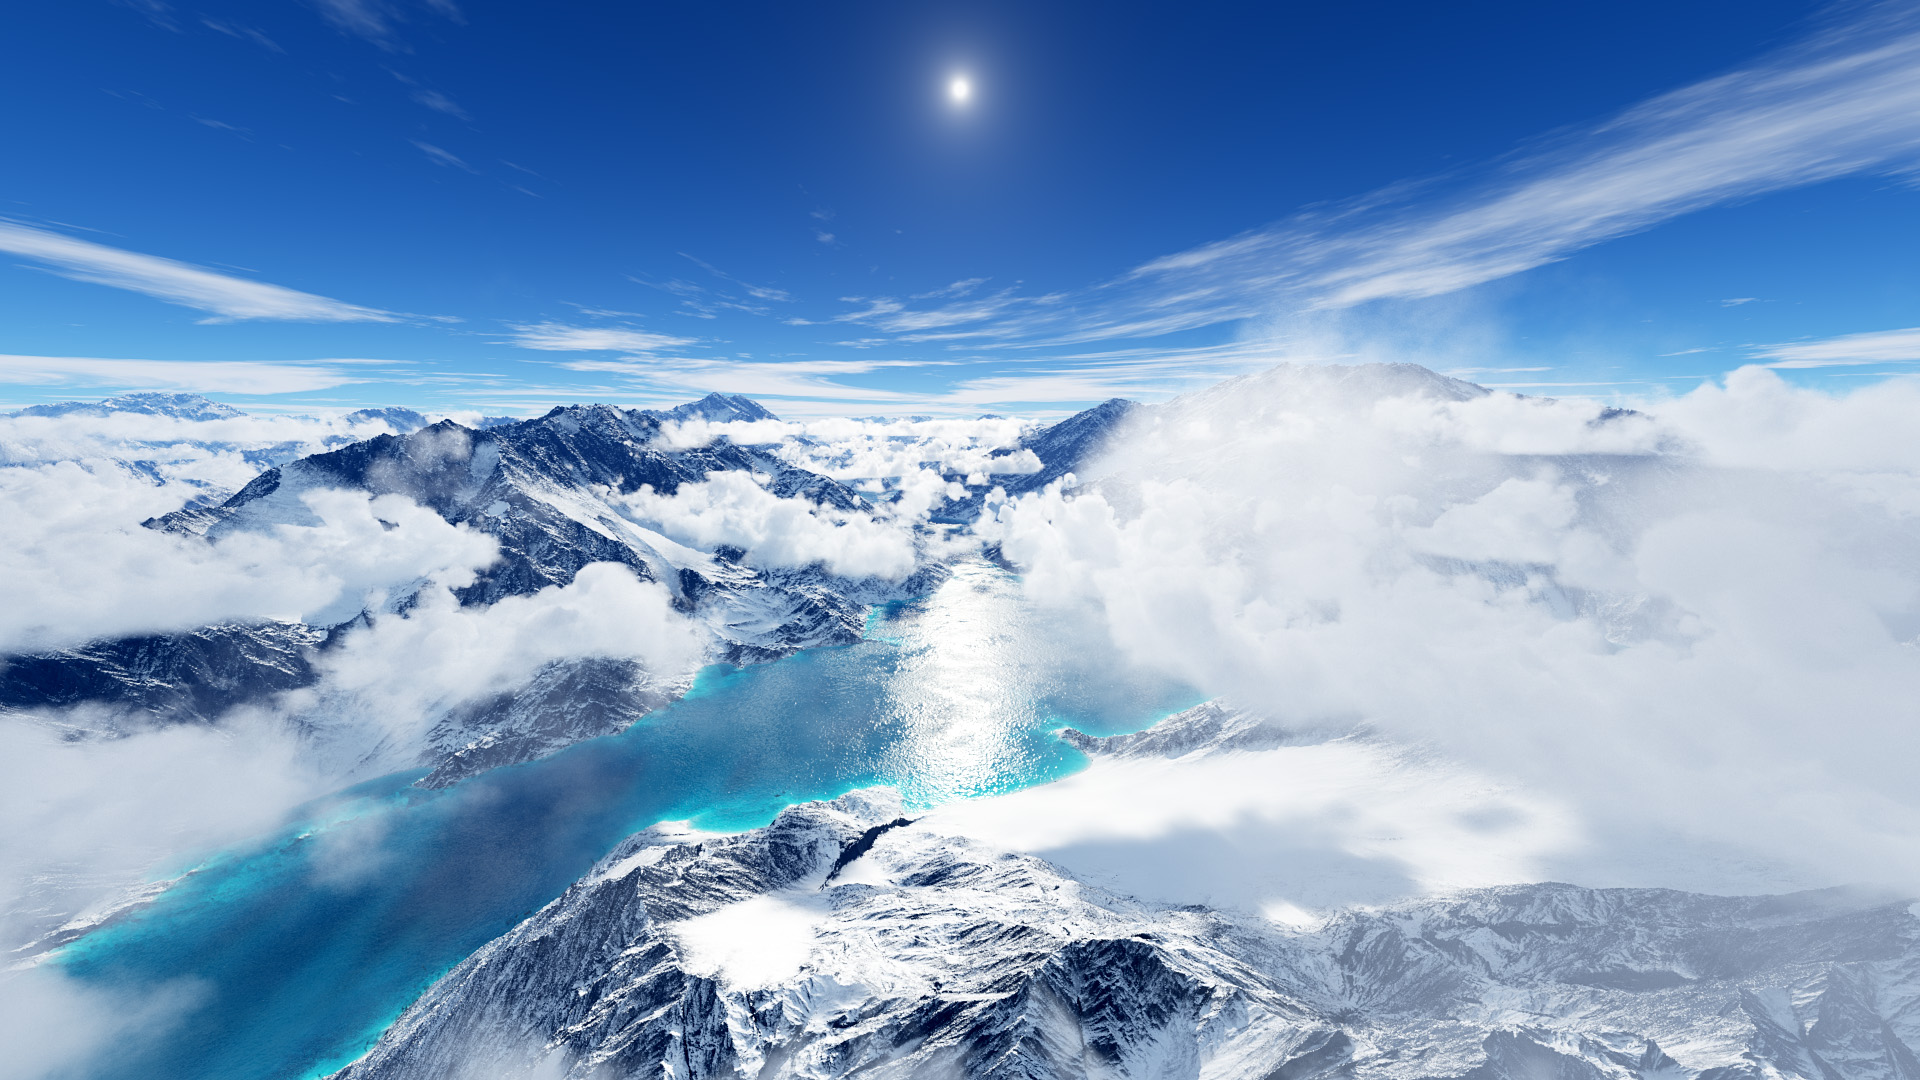 Over the Clouds - Icy Mountain with clouds - Wide Angle 2.jpg